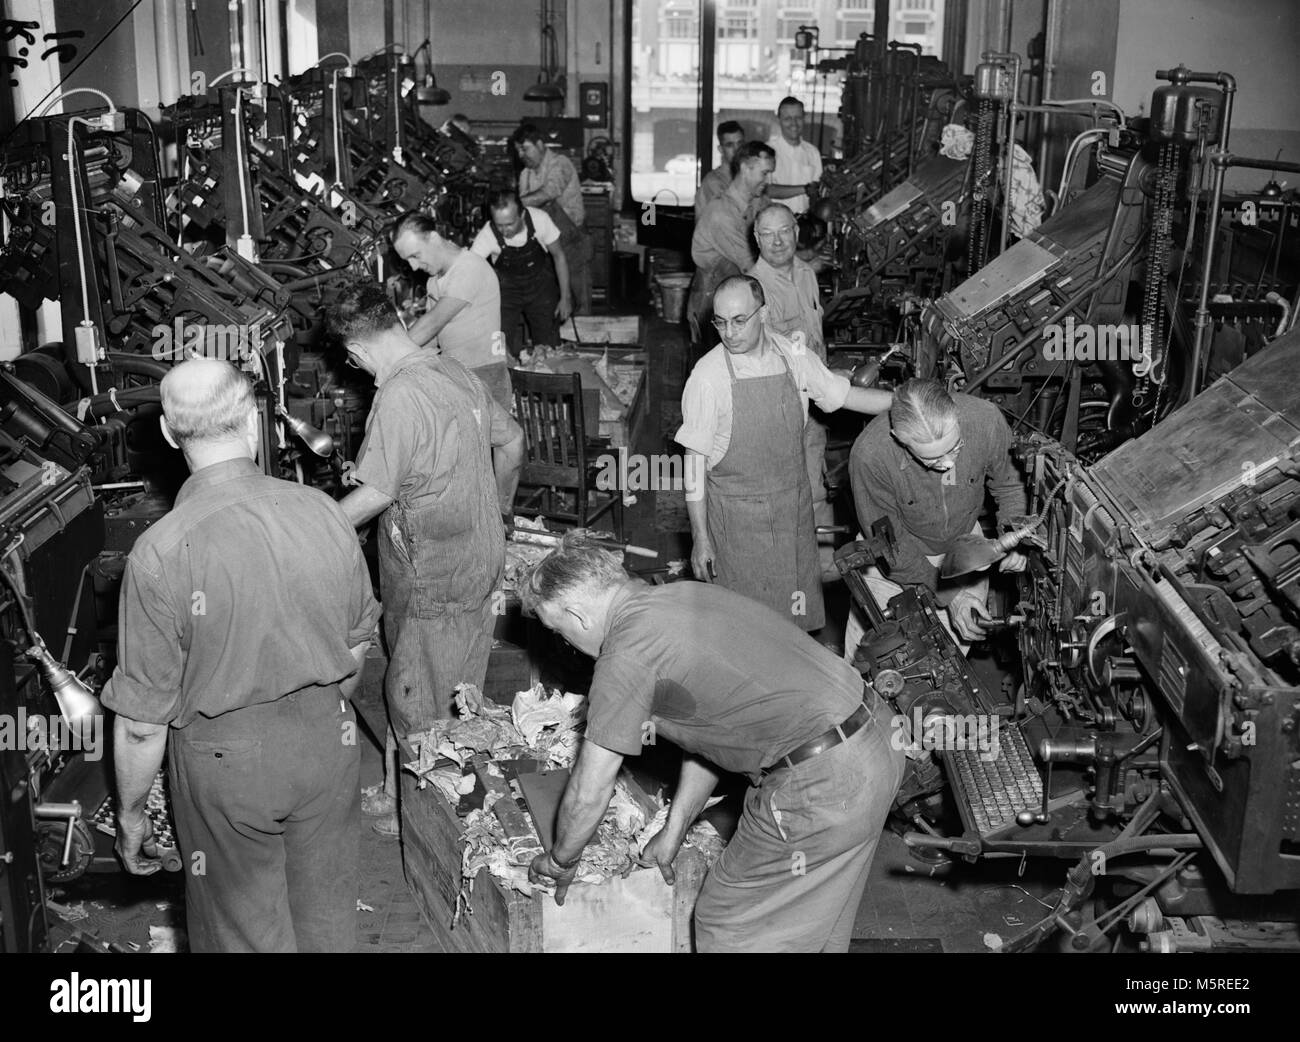 Workers assemble and configure linotype printing presses for a newspaper printing operation in Chicago, ca. 1949. Stock Photo